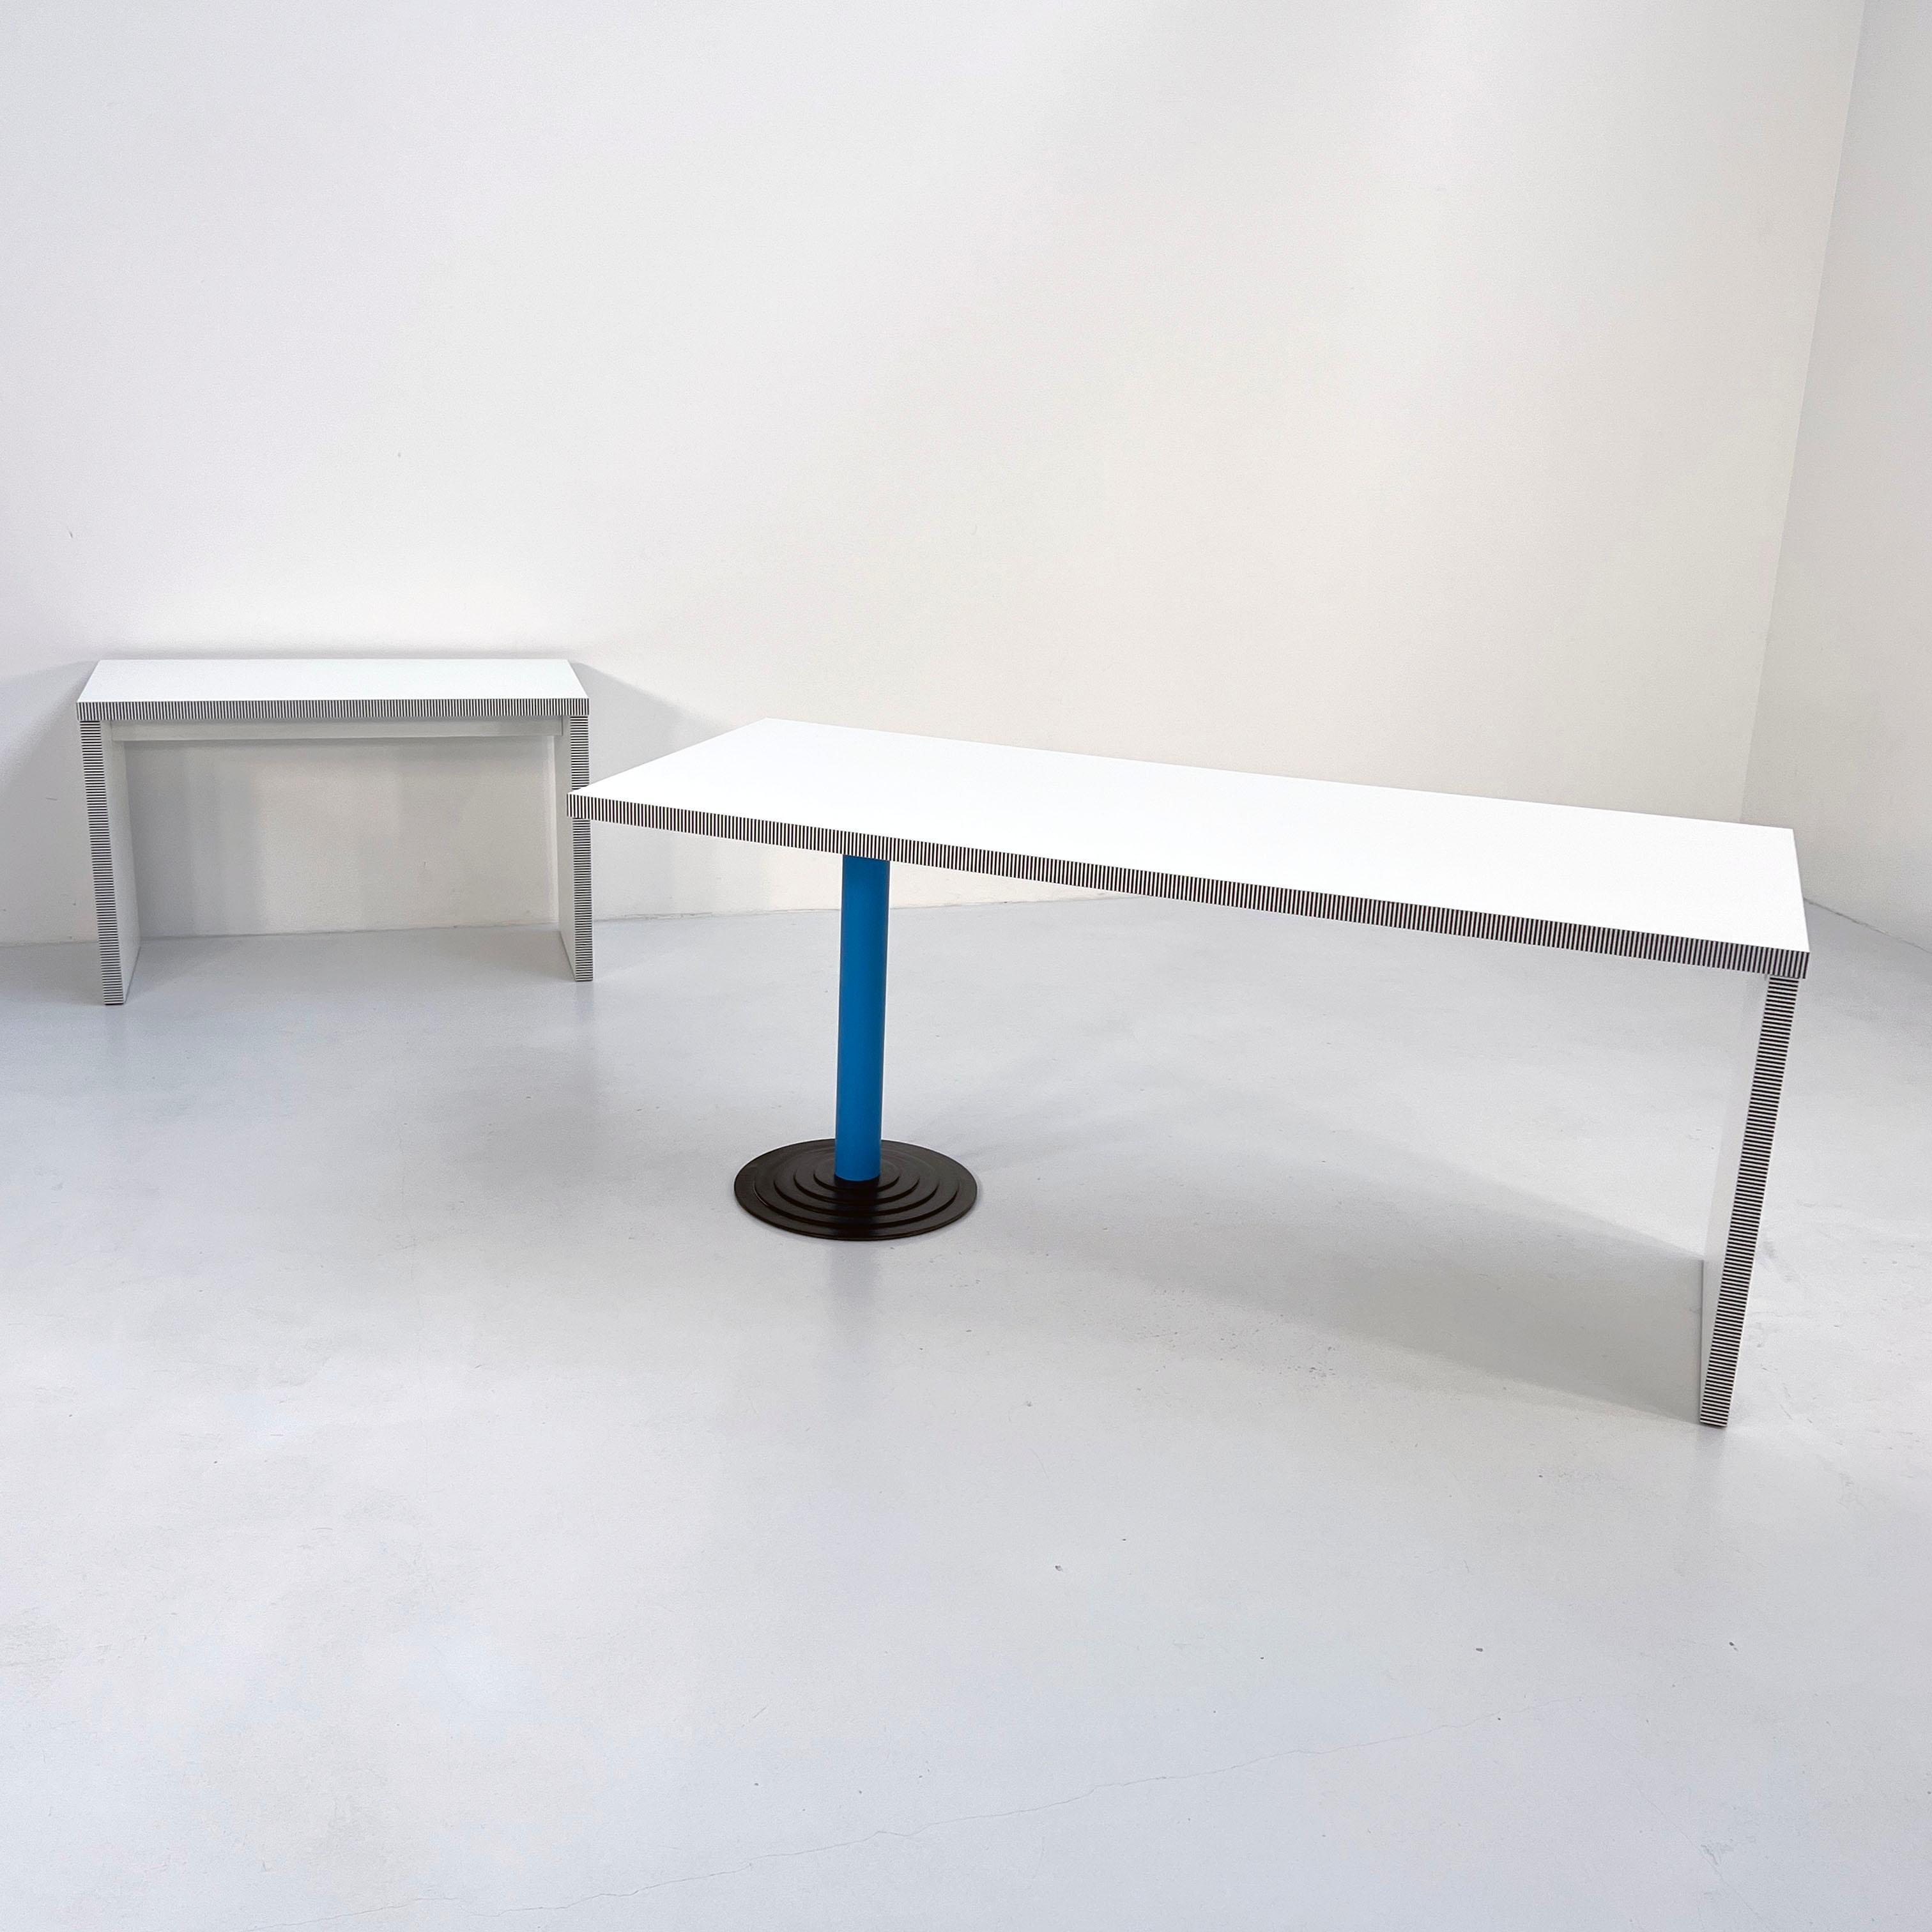 Late 20th Century Large Kroma Desk by Antonia Astori for Driade, 1980s